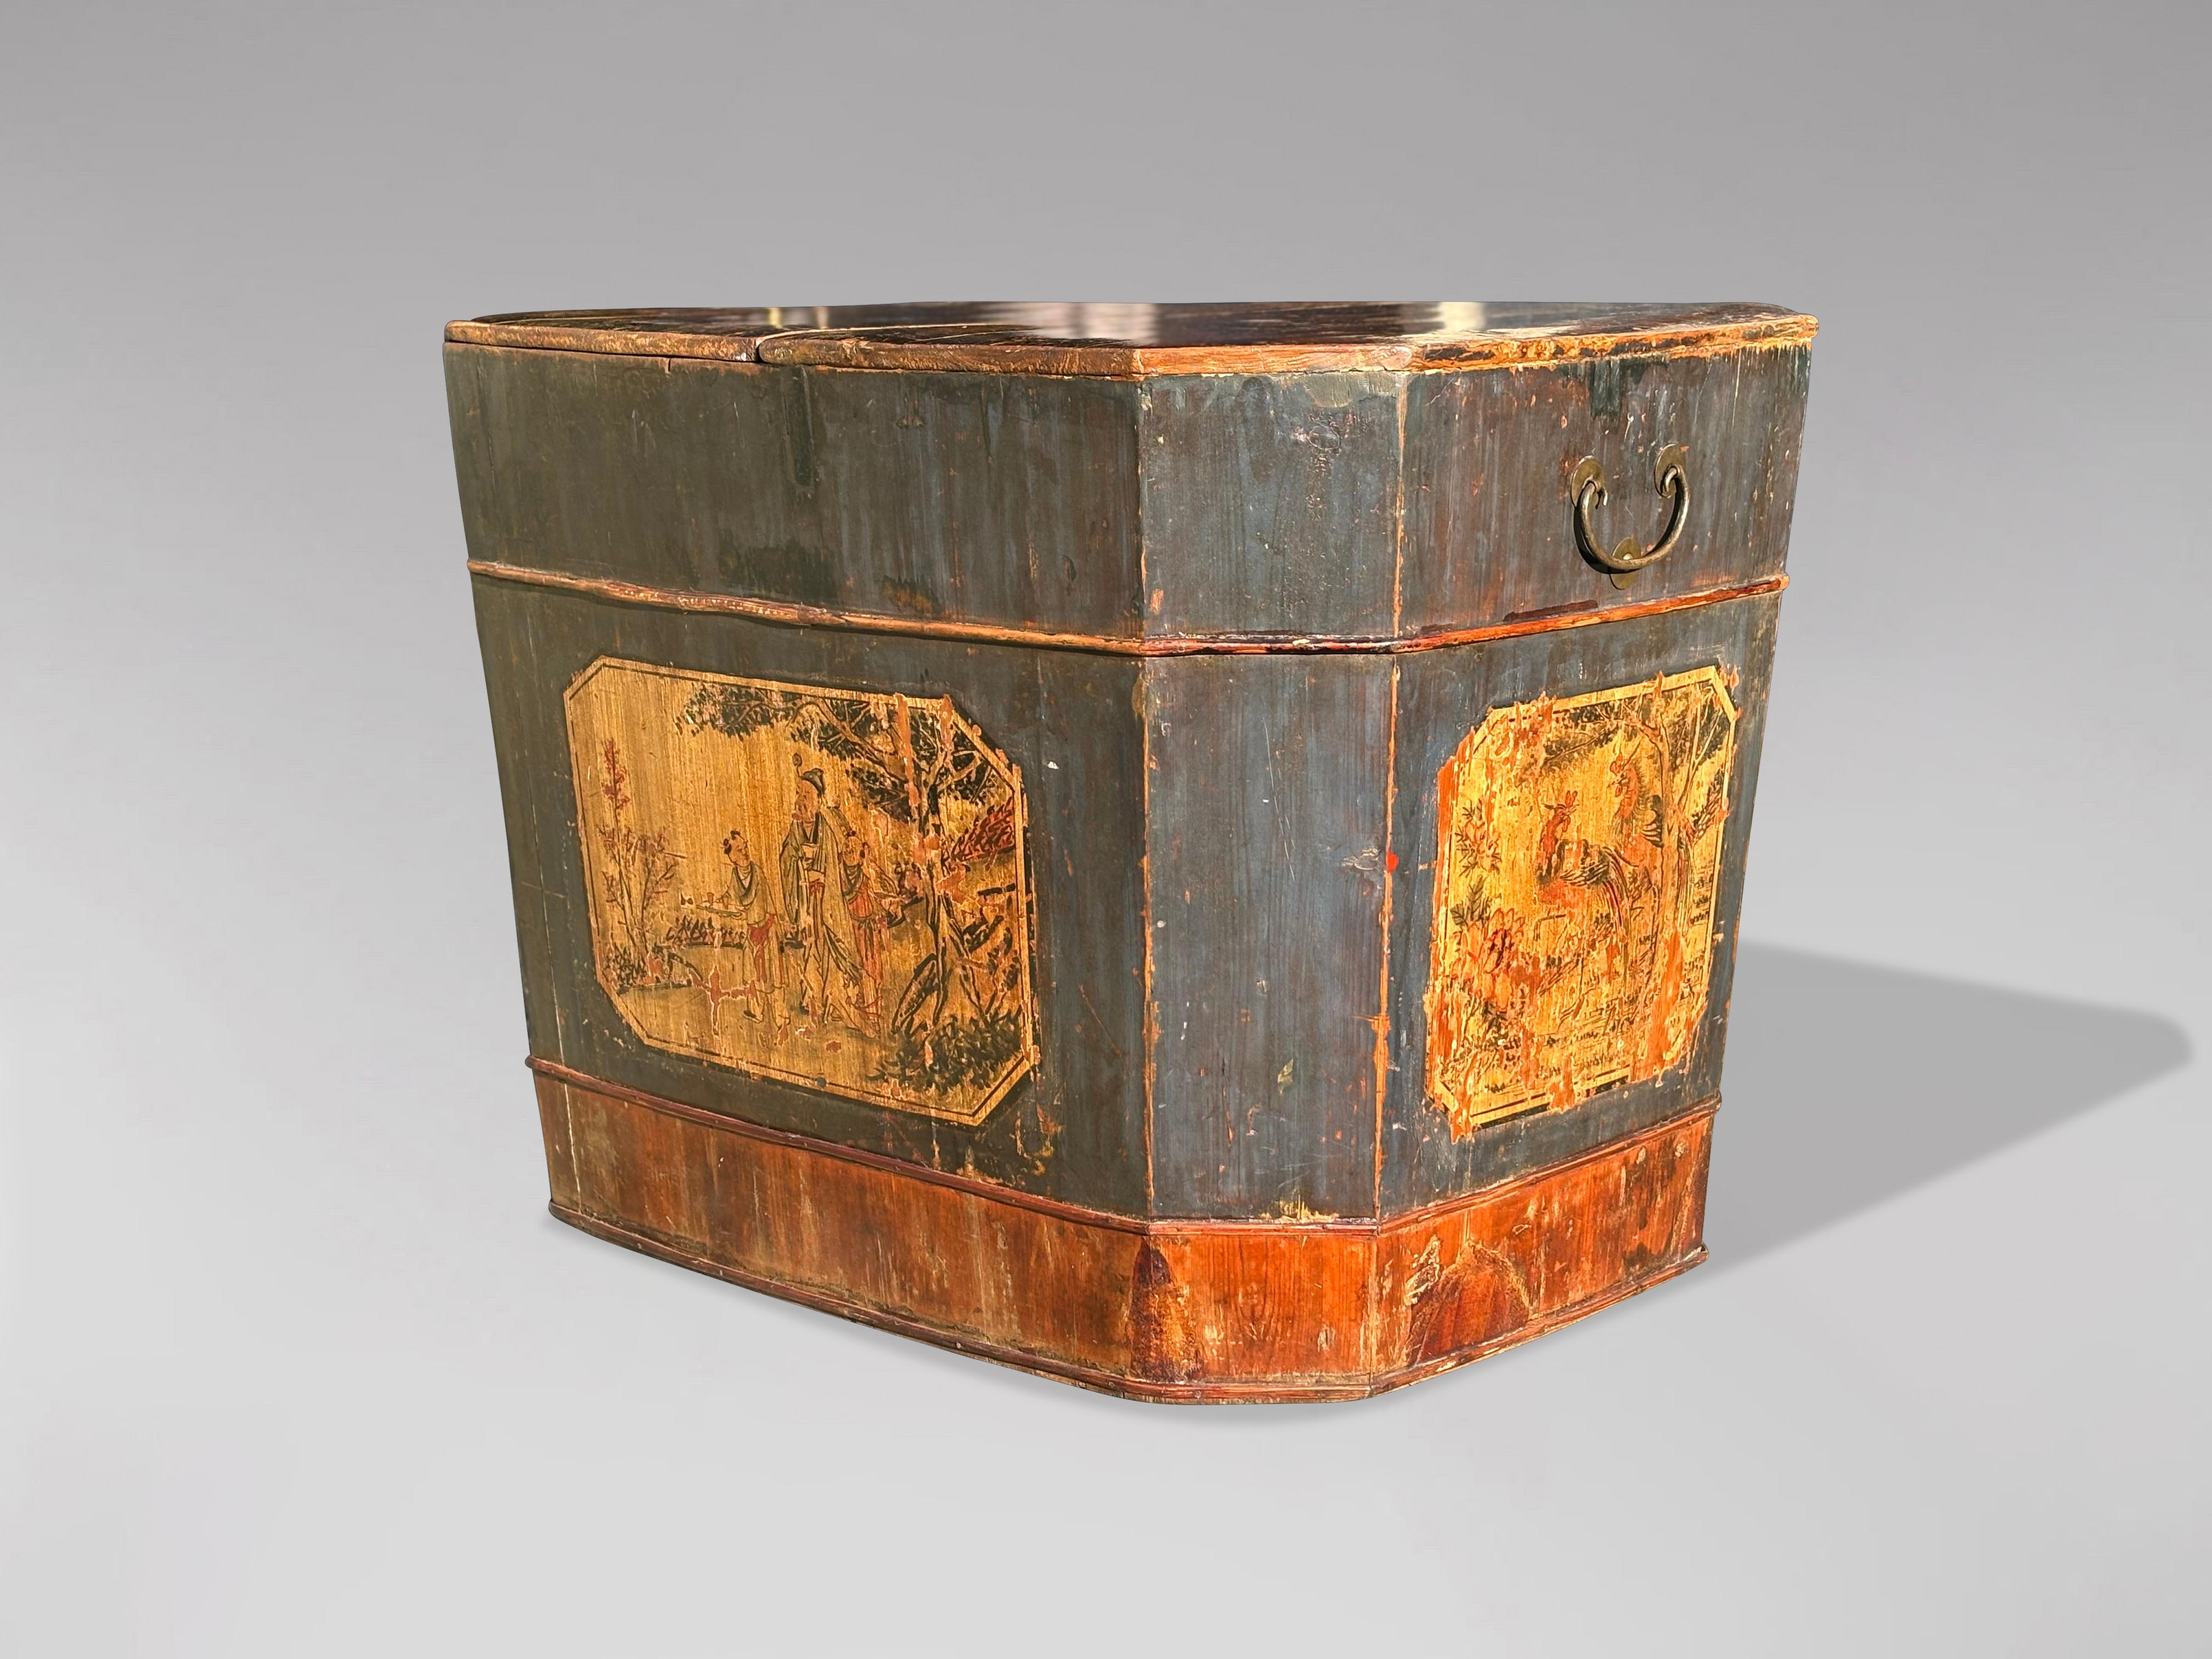 Chinese Export 19th Century Painted Chinese Rice Chest or Coffee Table